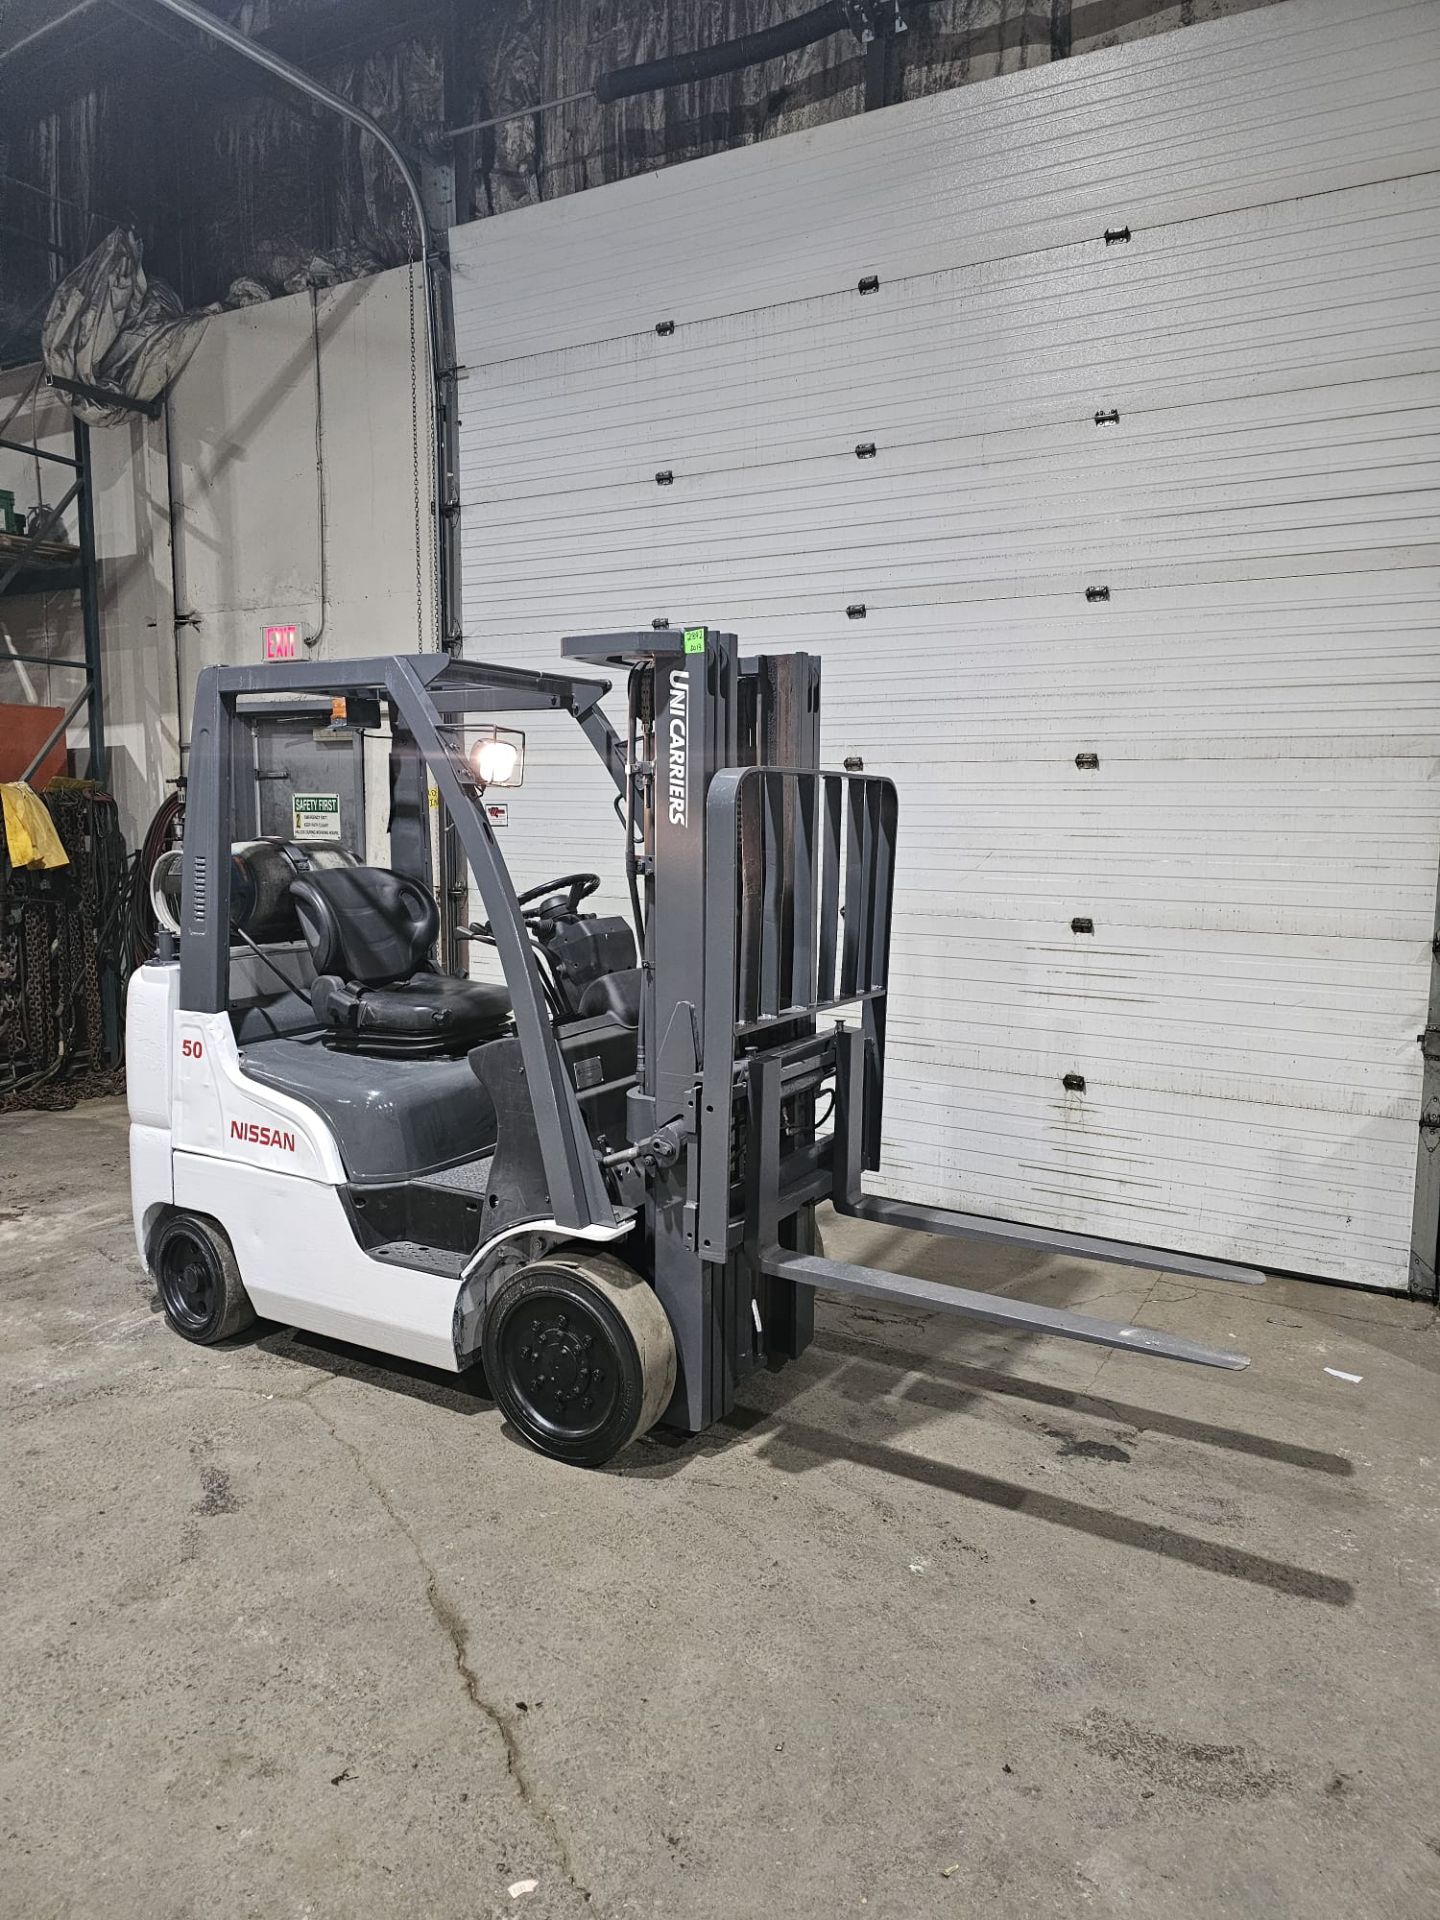 2013 Nissan 5000lbs Capacity LPG (Propane) Forklift 3-STAGE MAST with sideshift (no propane tank - Image 3 of 5